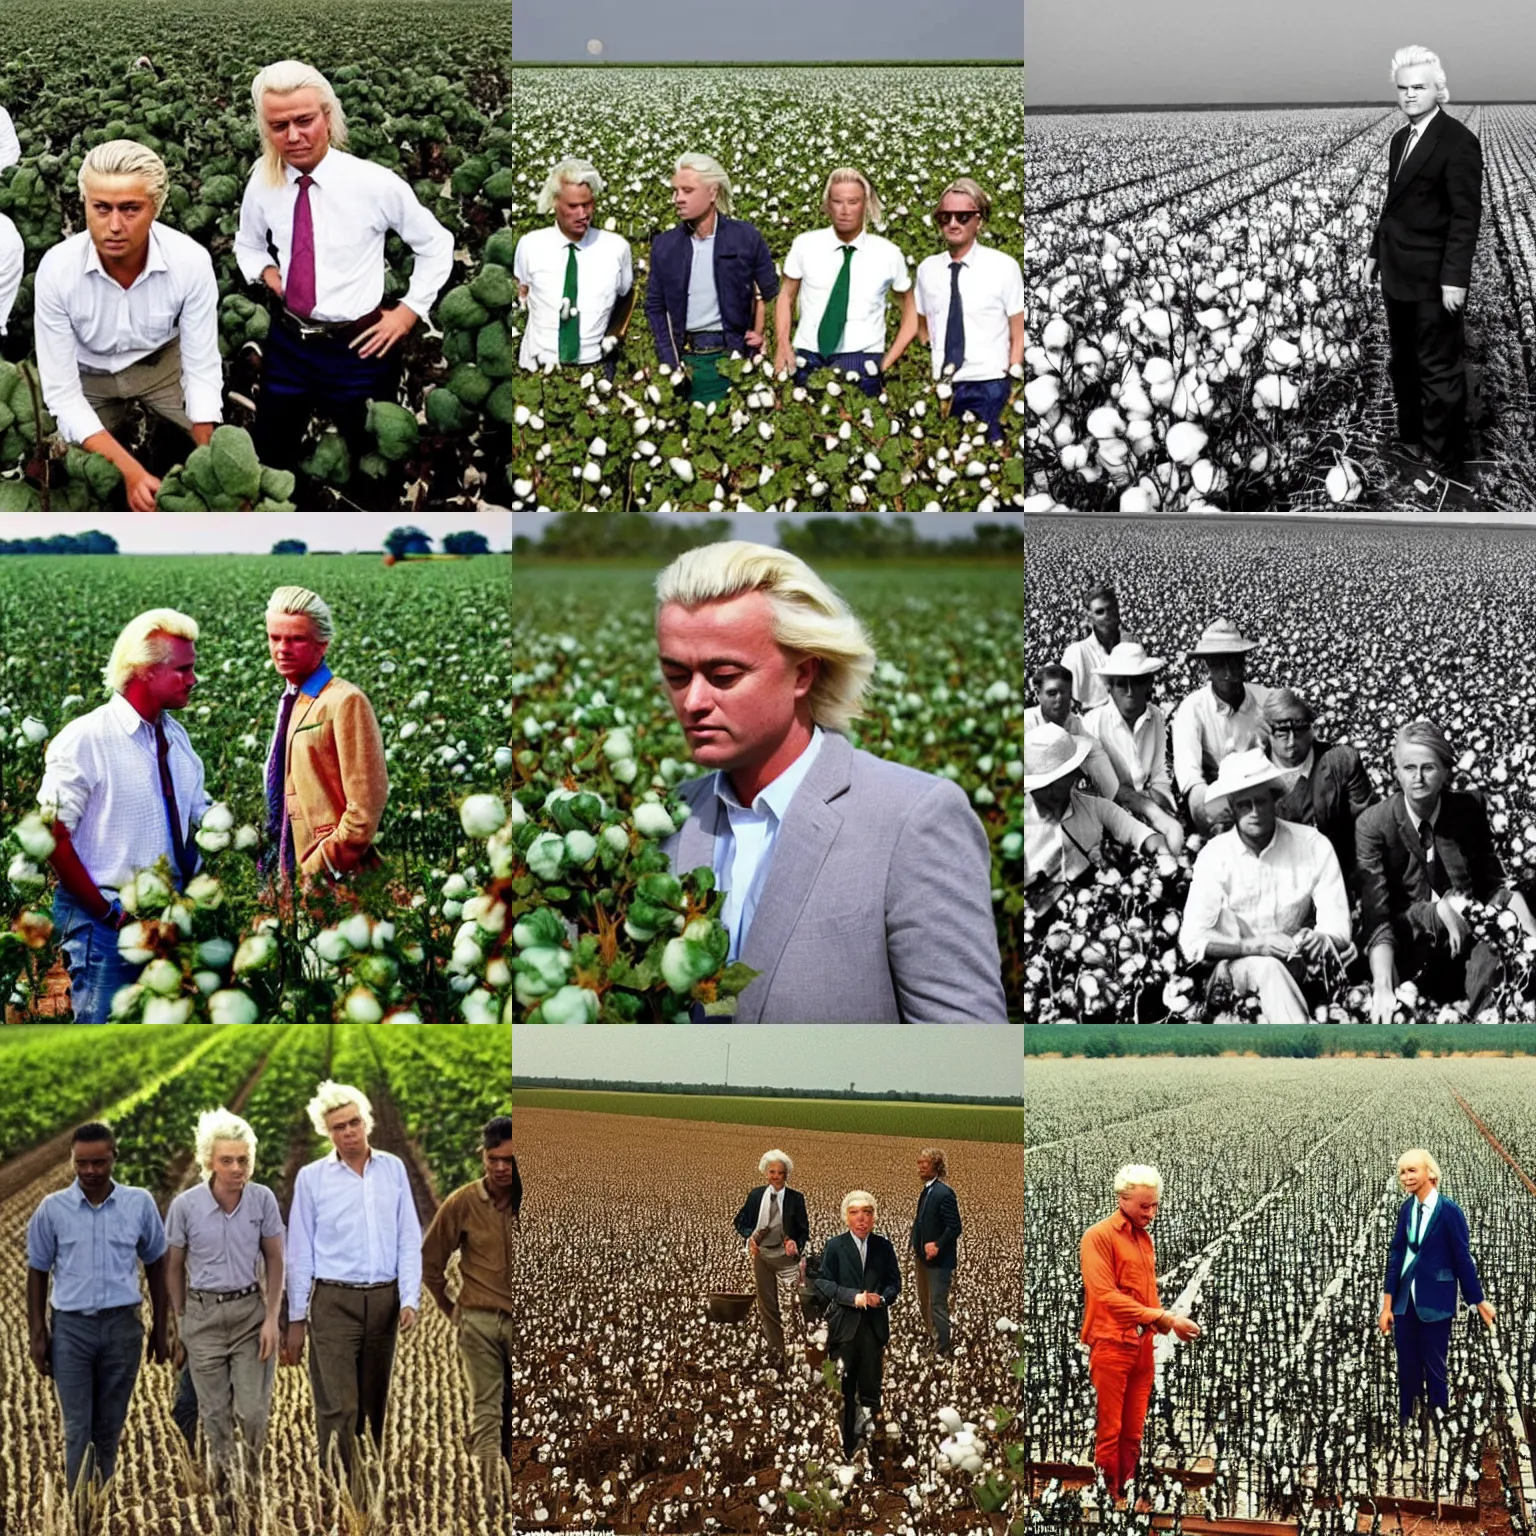 Prompt: geert wilders working in the cotton fields with fellow colleagues, in the style of Wes Anderson